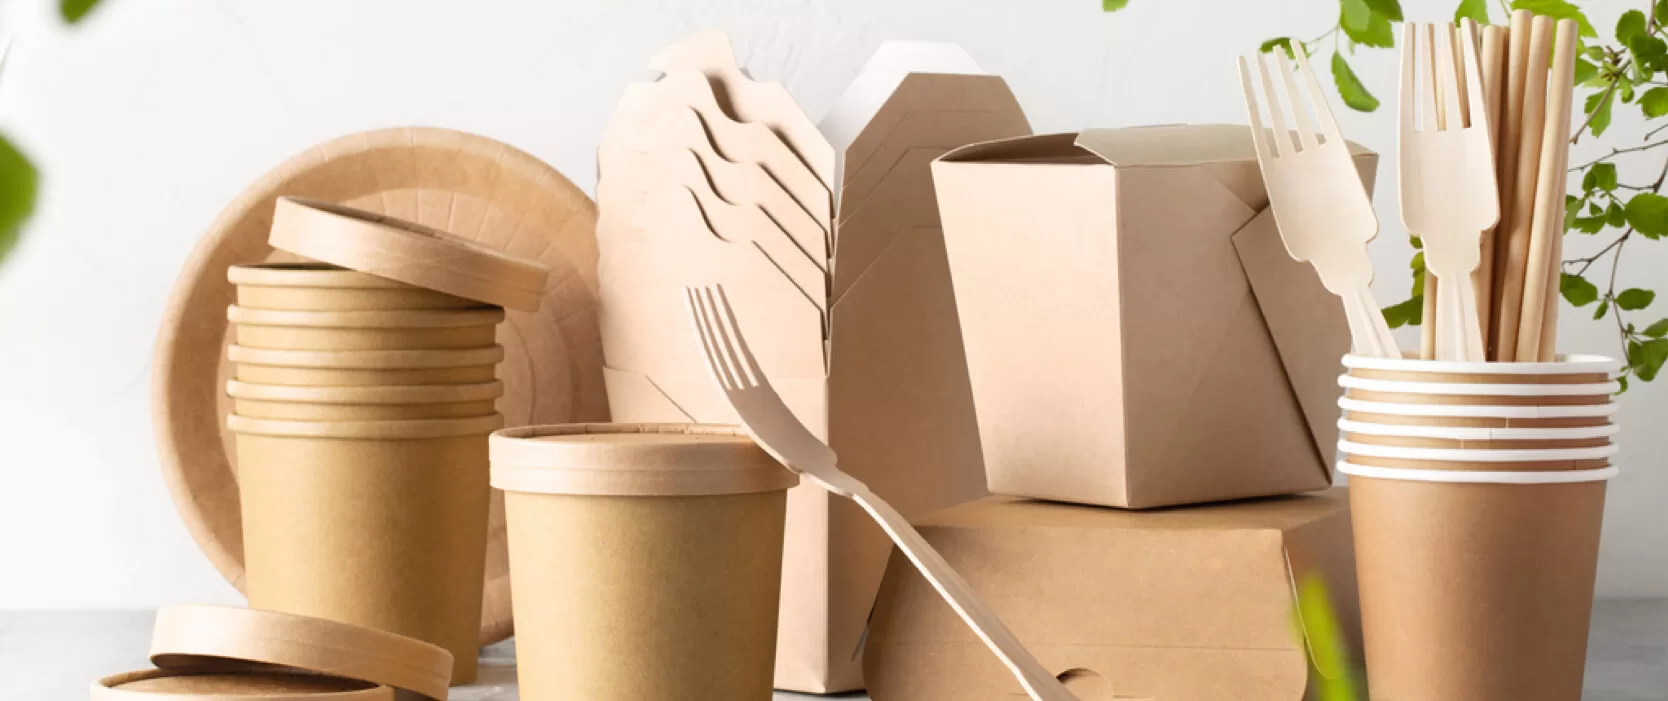 Why Do We Need Sustainable Food Packaging?